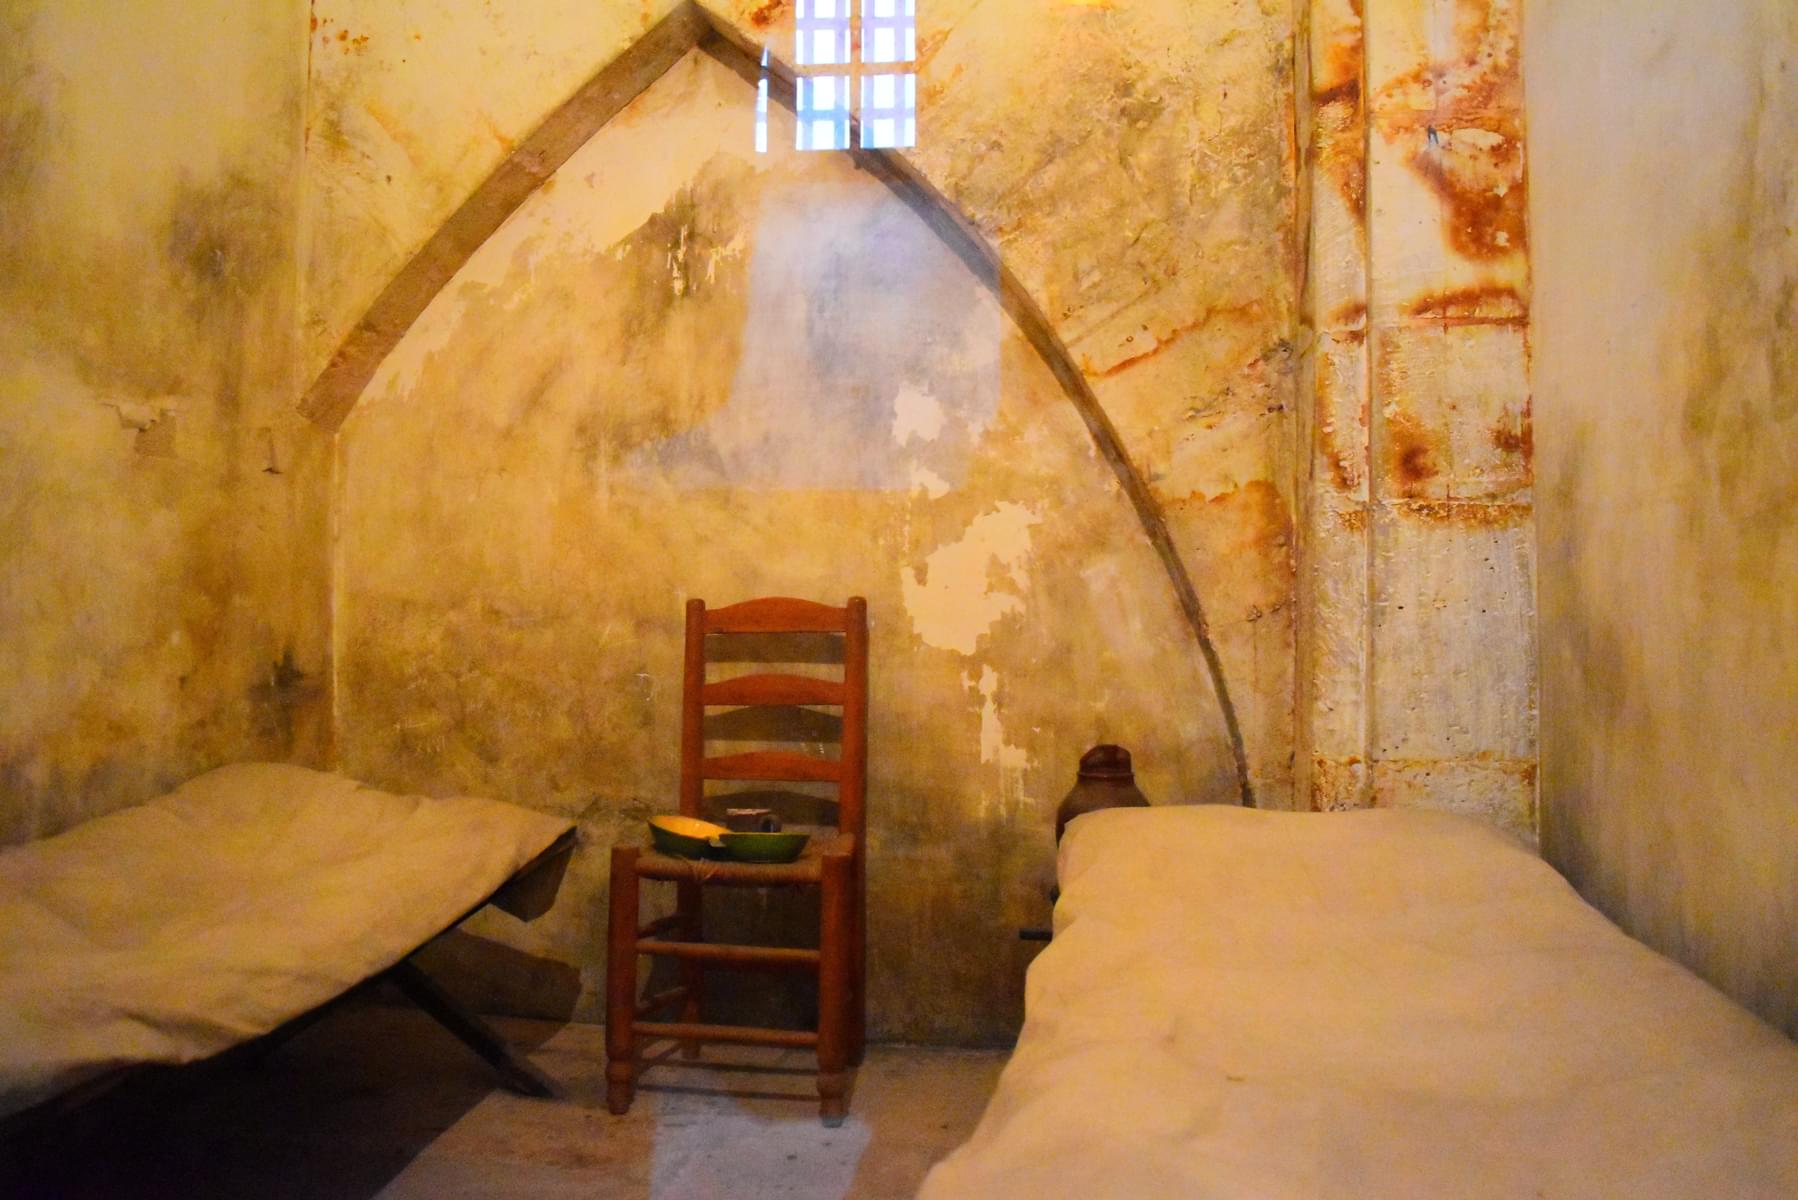 The jail beds in the Conciergerie